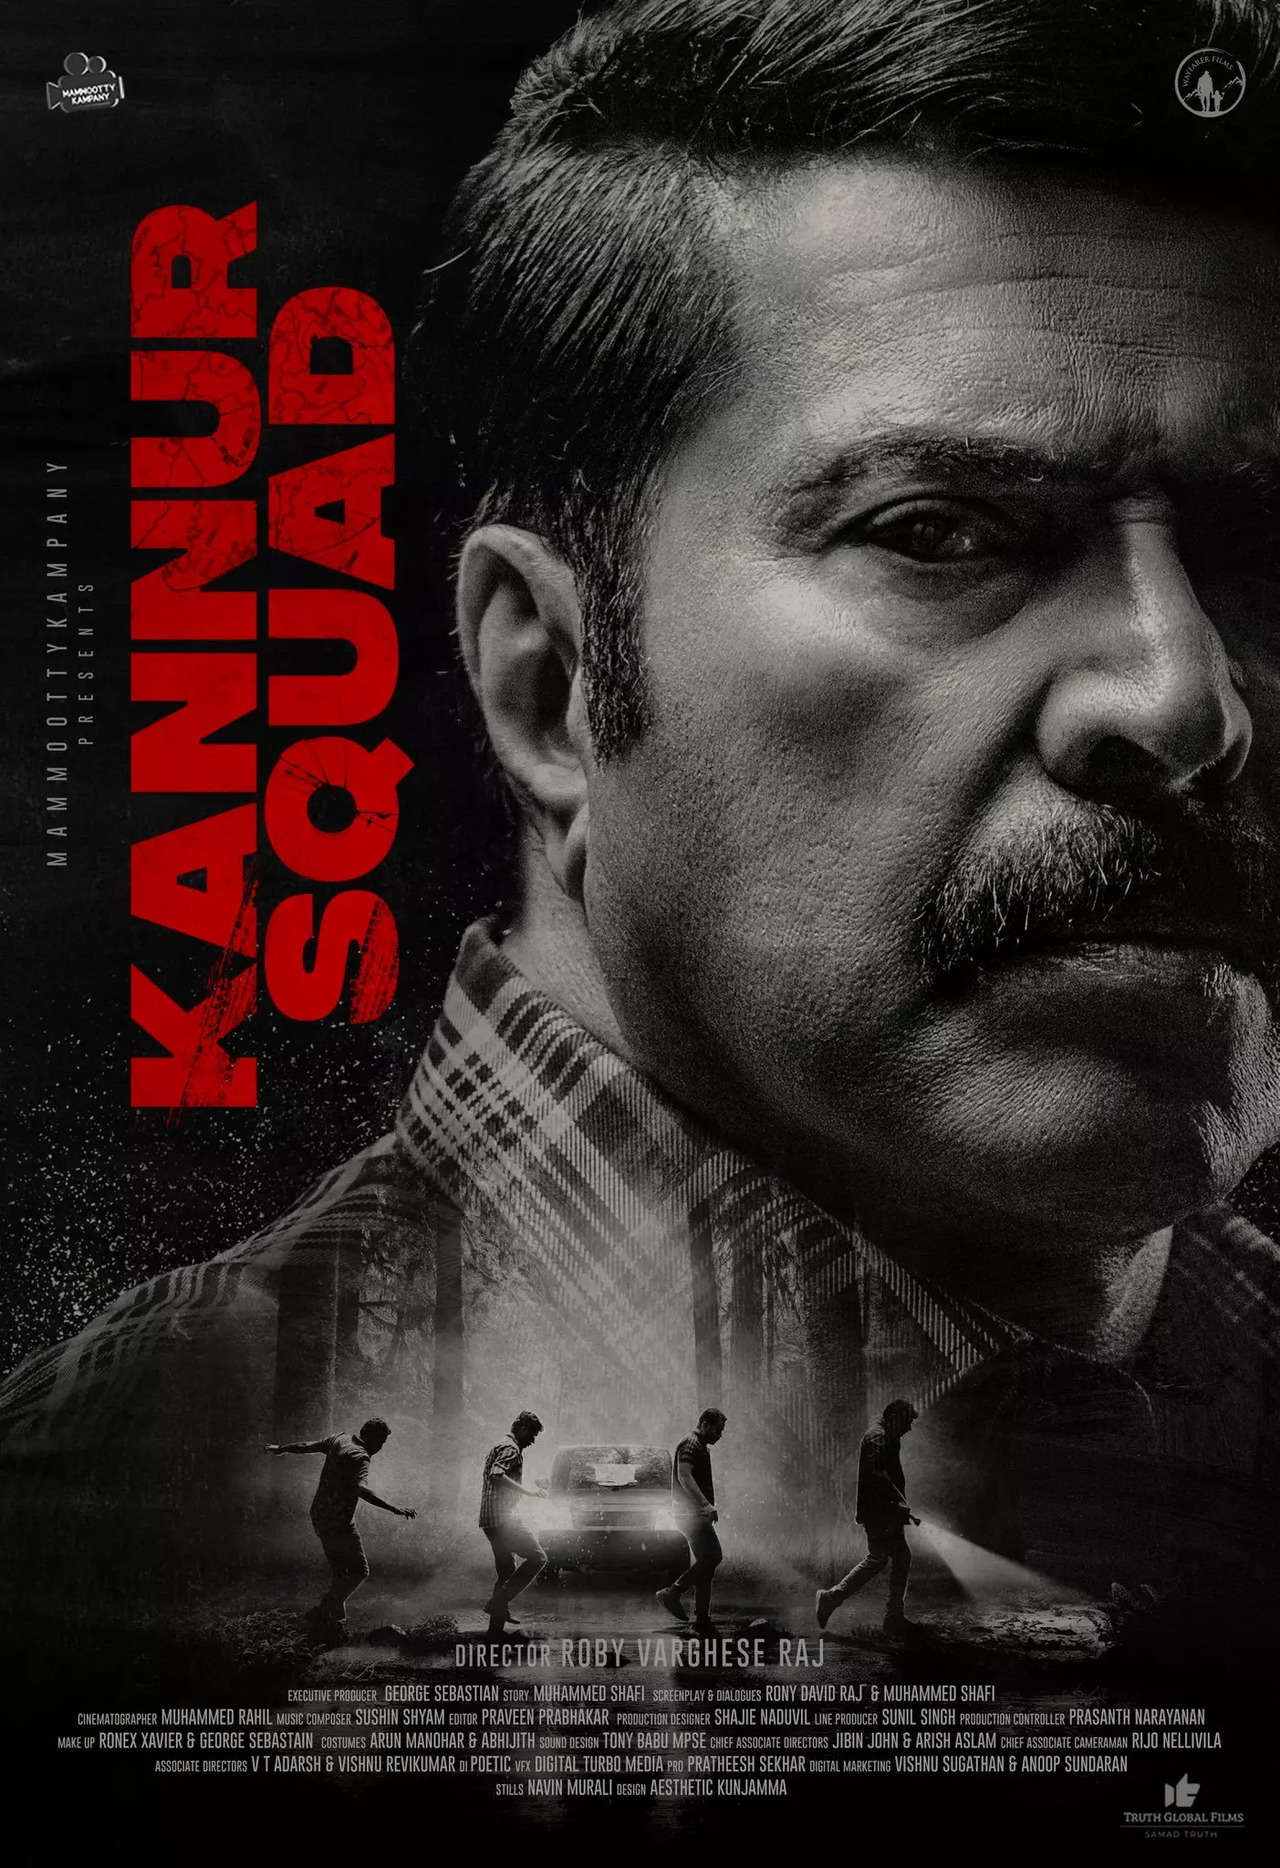 Mammootty's next with Roby Varghese Raj titled 'Kannur Squad', first look poster out | Malayalam Movie News - Times of India